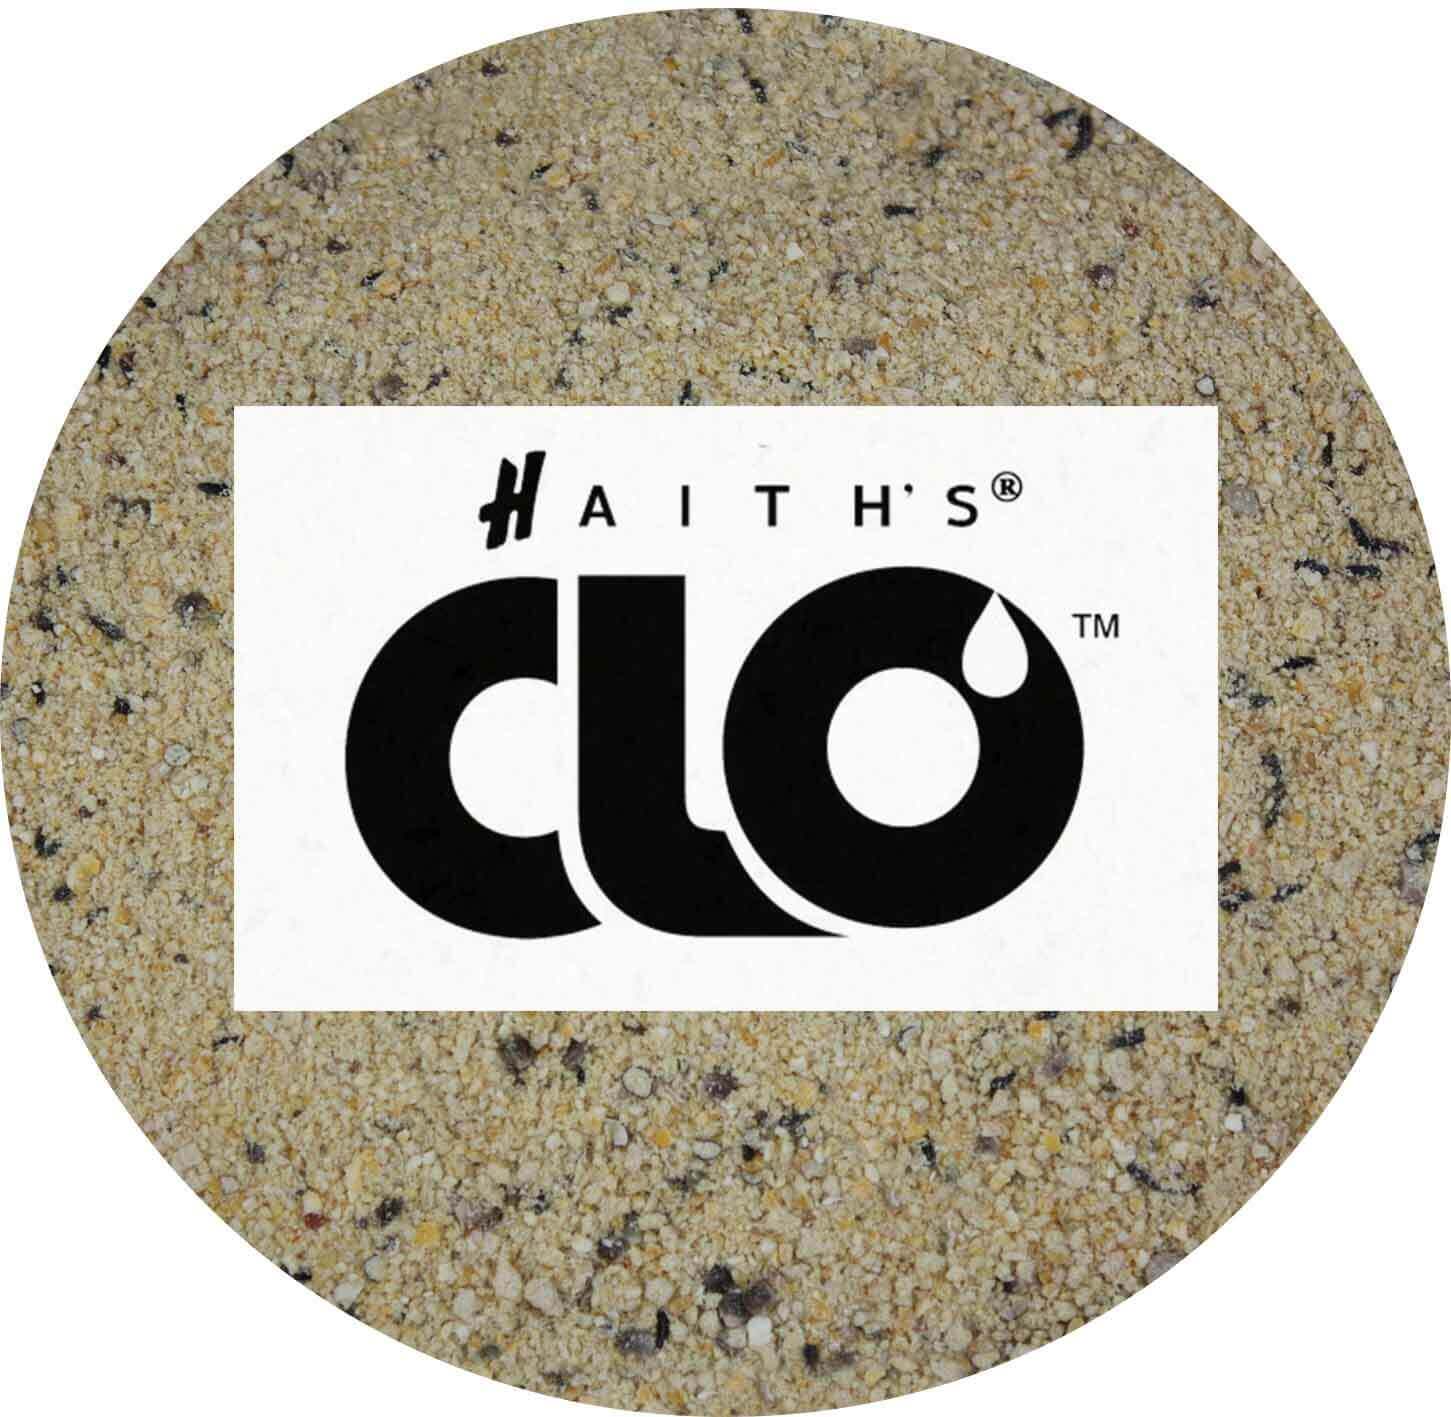 Haith's CLO  is a  popular base mix ingredient that will add crunch to your base mix